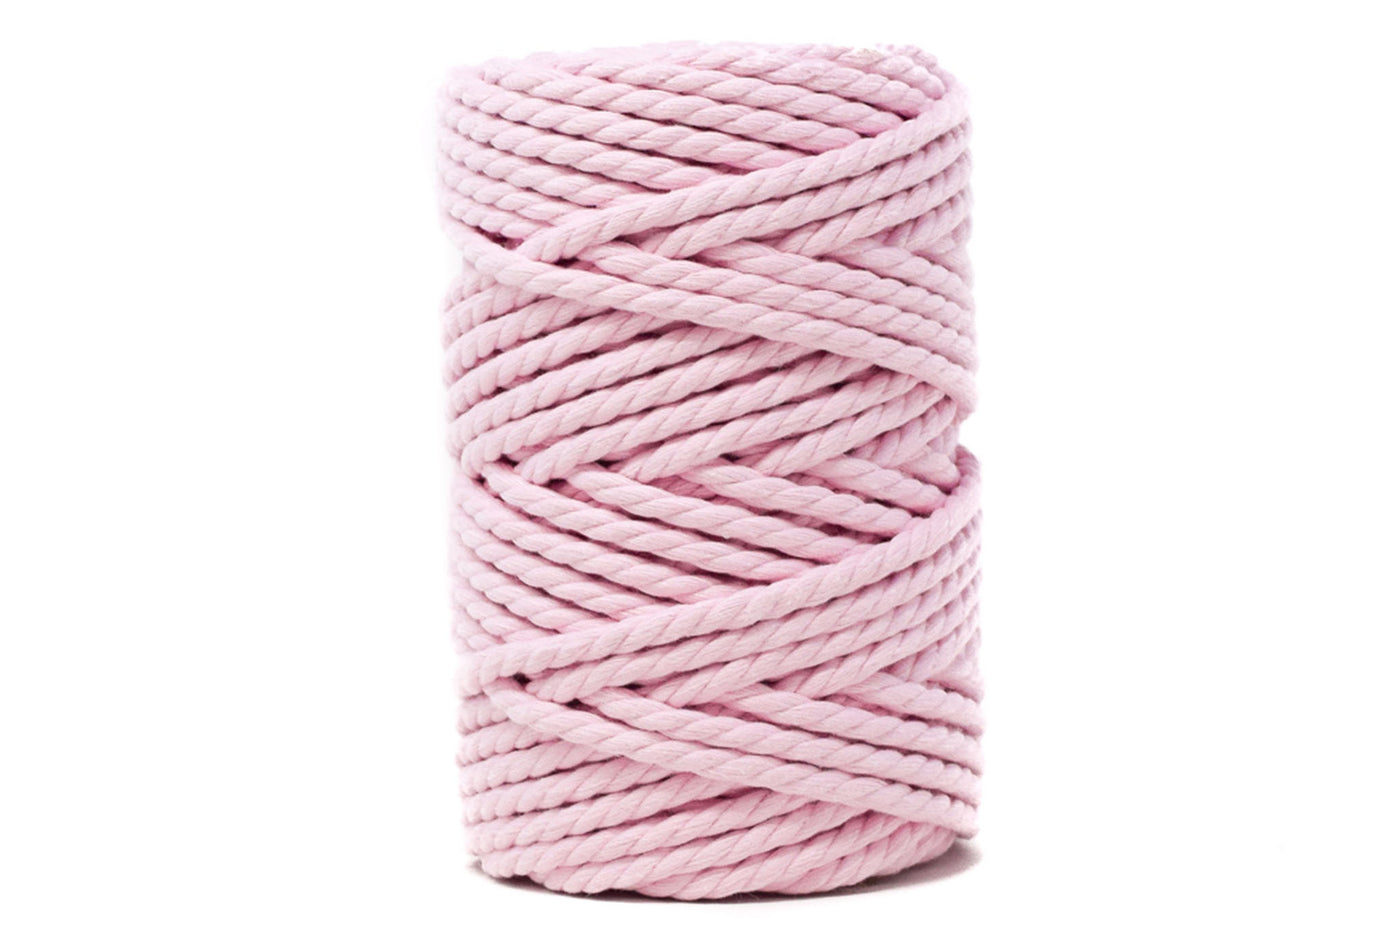 COTTON ROPE ZERO WASTE 5 MM - 3 PLY - BABY PINK COLOR